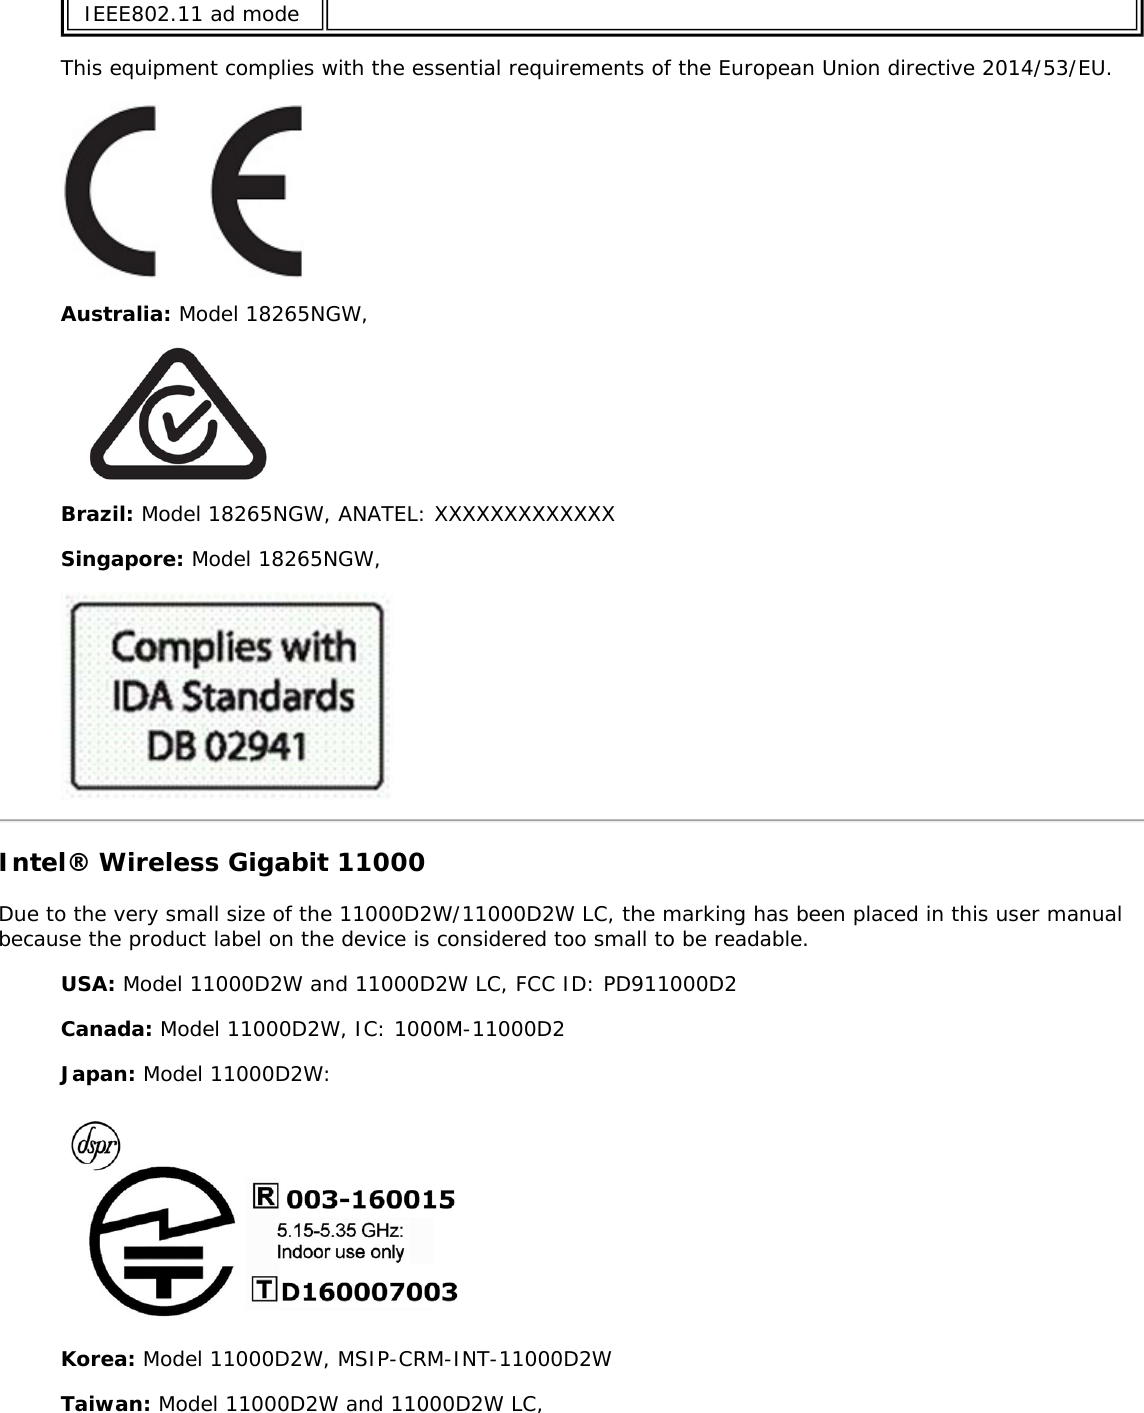 IEEE802.11 ad modeThis equipment complies with the essential requirements of the European Union directive 2014/53/EU.Australia: Model 18265NGW,Brazil: Model 18265NGW, ANATEL: XXXXXXXXXXXXXSingapore: Model 18265NGW,Intel® Wireless Gigabit 11000Due to the very small size of the 11000D2W/11000D2W LC, the marking has been placed in this user manualbecause the product label on the device is considered too small to be readable.USA: Model 11000D2W and 11000D2W LC, FCC ID: PD911000D2Canada: Model 11000D2W, IC: 1000M-11000D2Japan: Model 11000D2W:Korea: Model 11000D2W, MSIP-CRM-INT-11000D2WTaiwan: Model 11000D2W and 11000D2W LC,